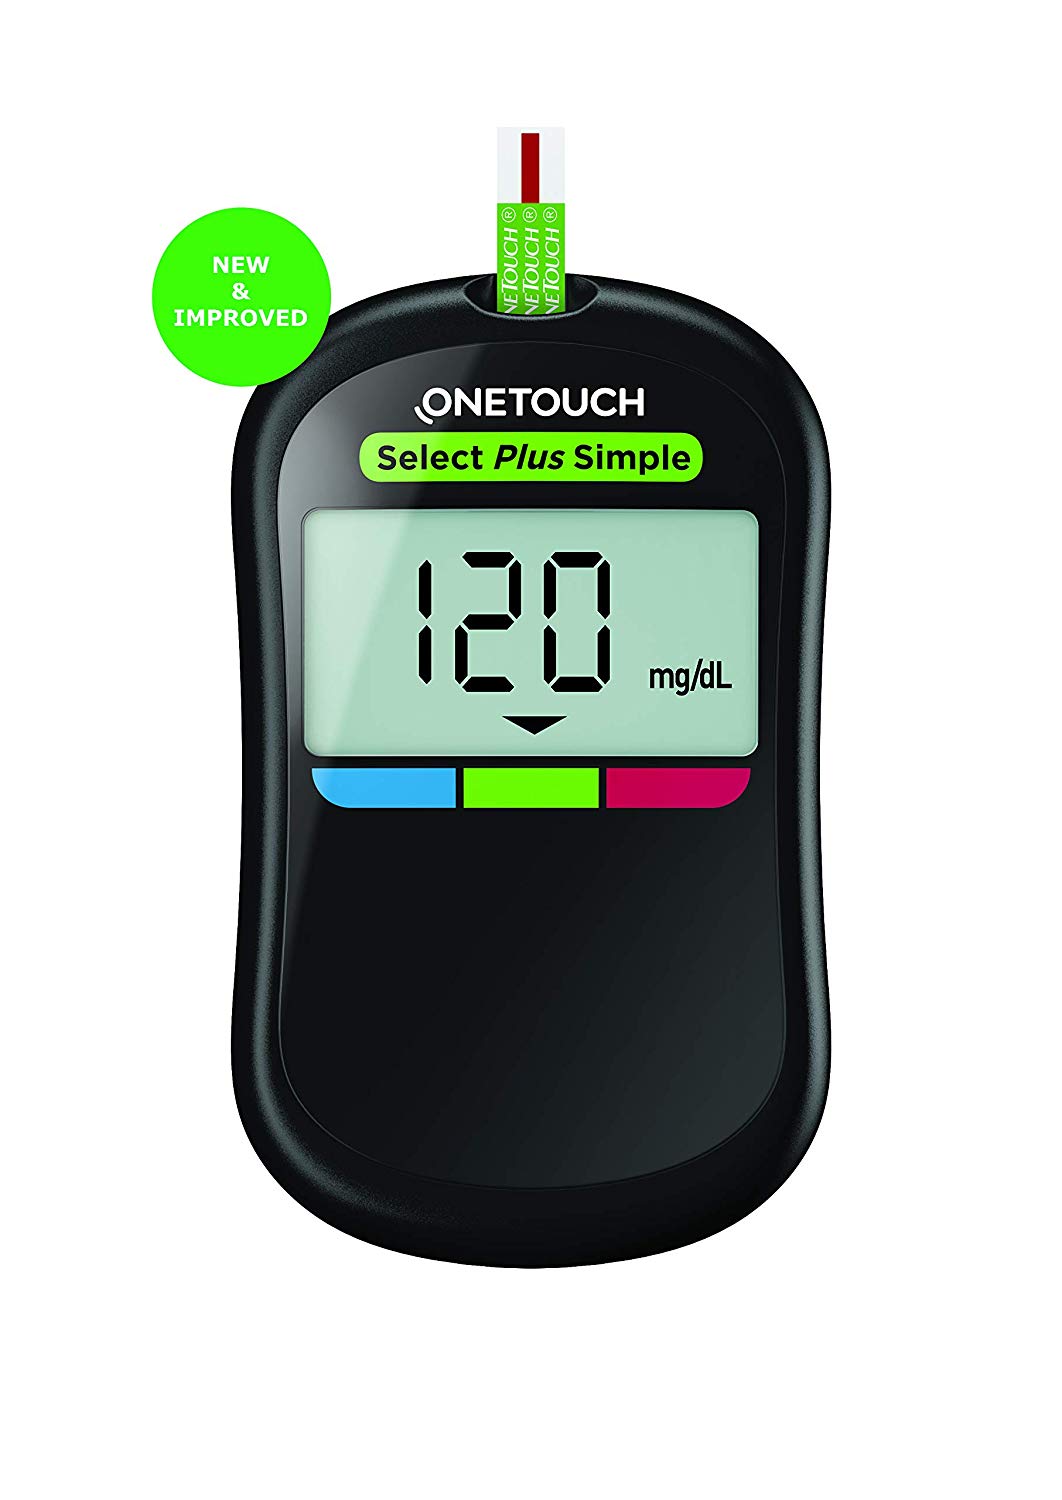 ONETOUCH select simple Plus. Simply plus